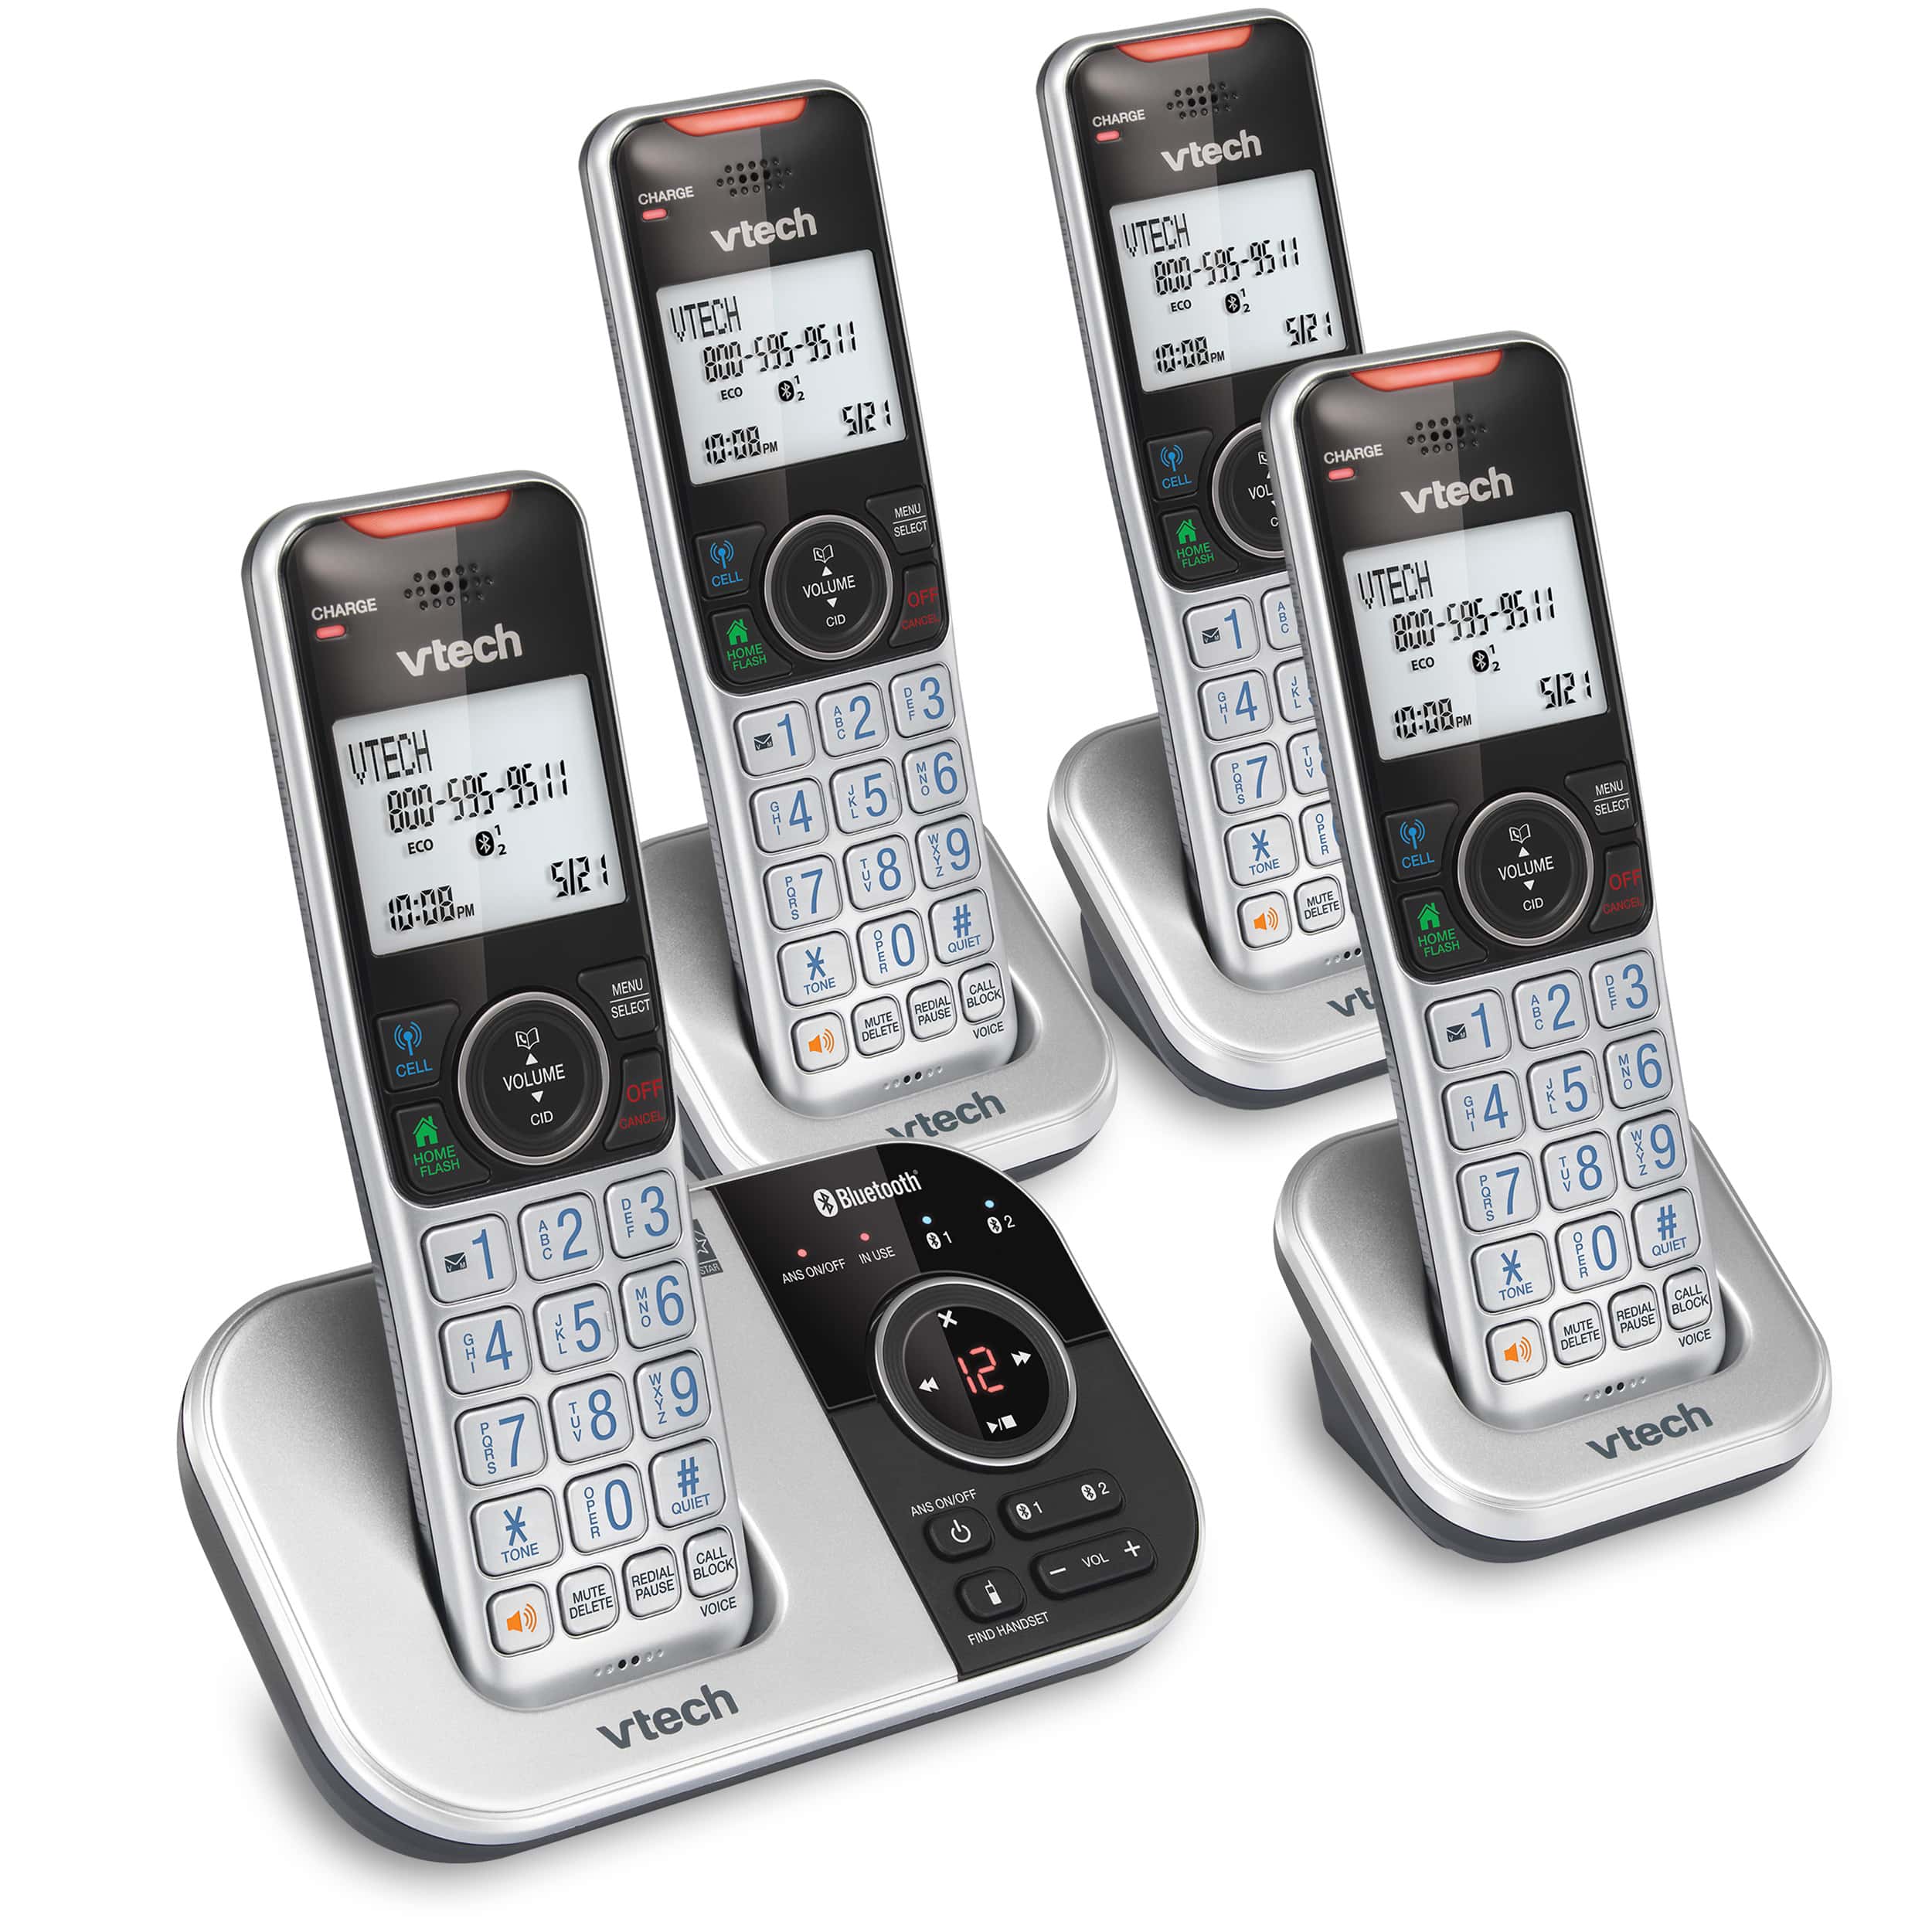 4-Handset Expandable Cordless Phone with Bluetooth Connect to Cell, Smart Call Blocker and Answering System (Silver & Black)